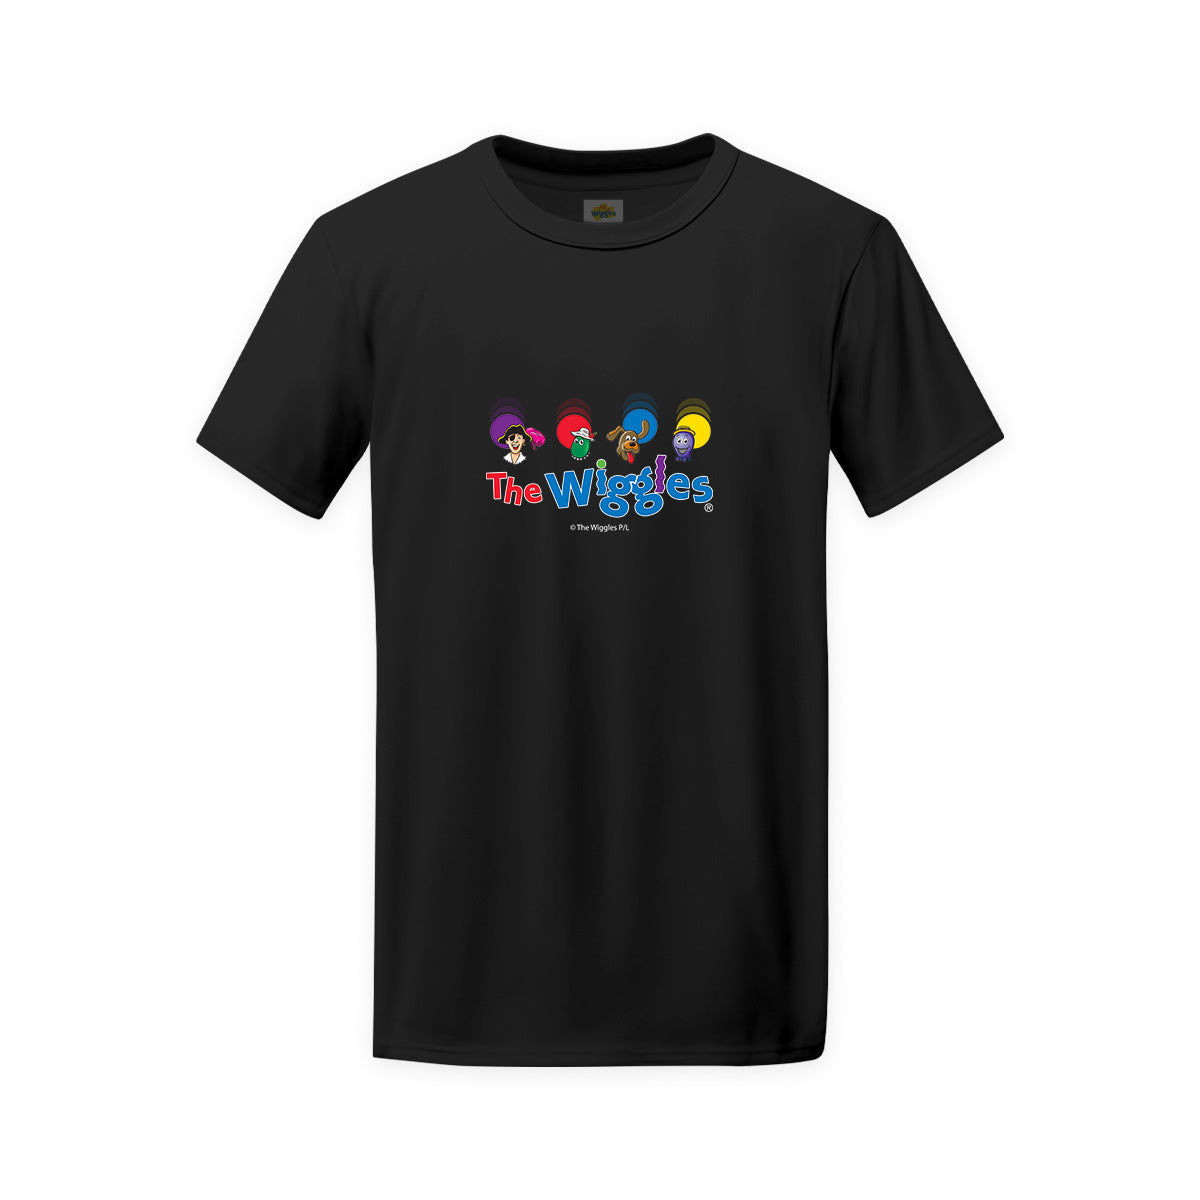 The Wiggles Youth Original Friends Short Sleeve T-shirt V1